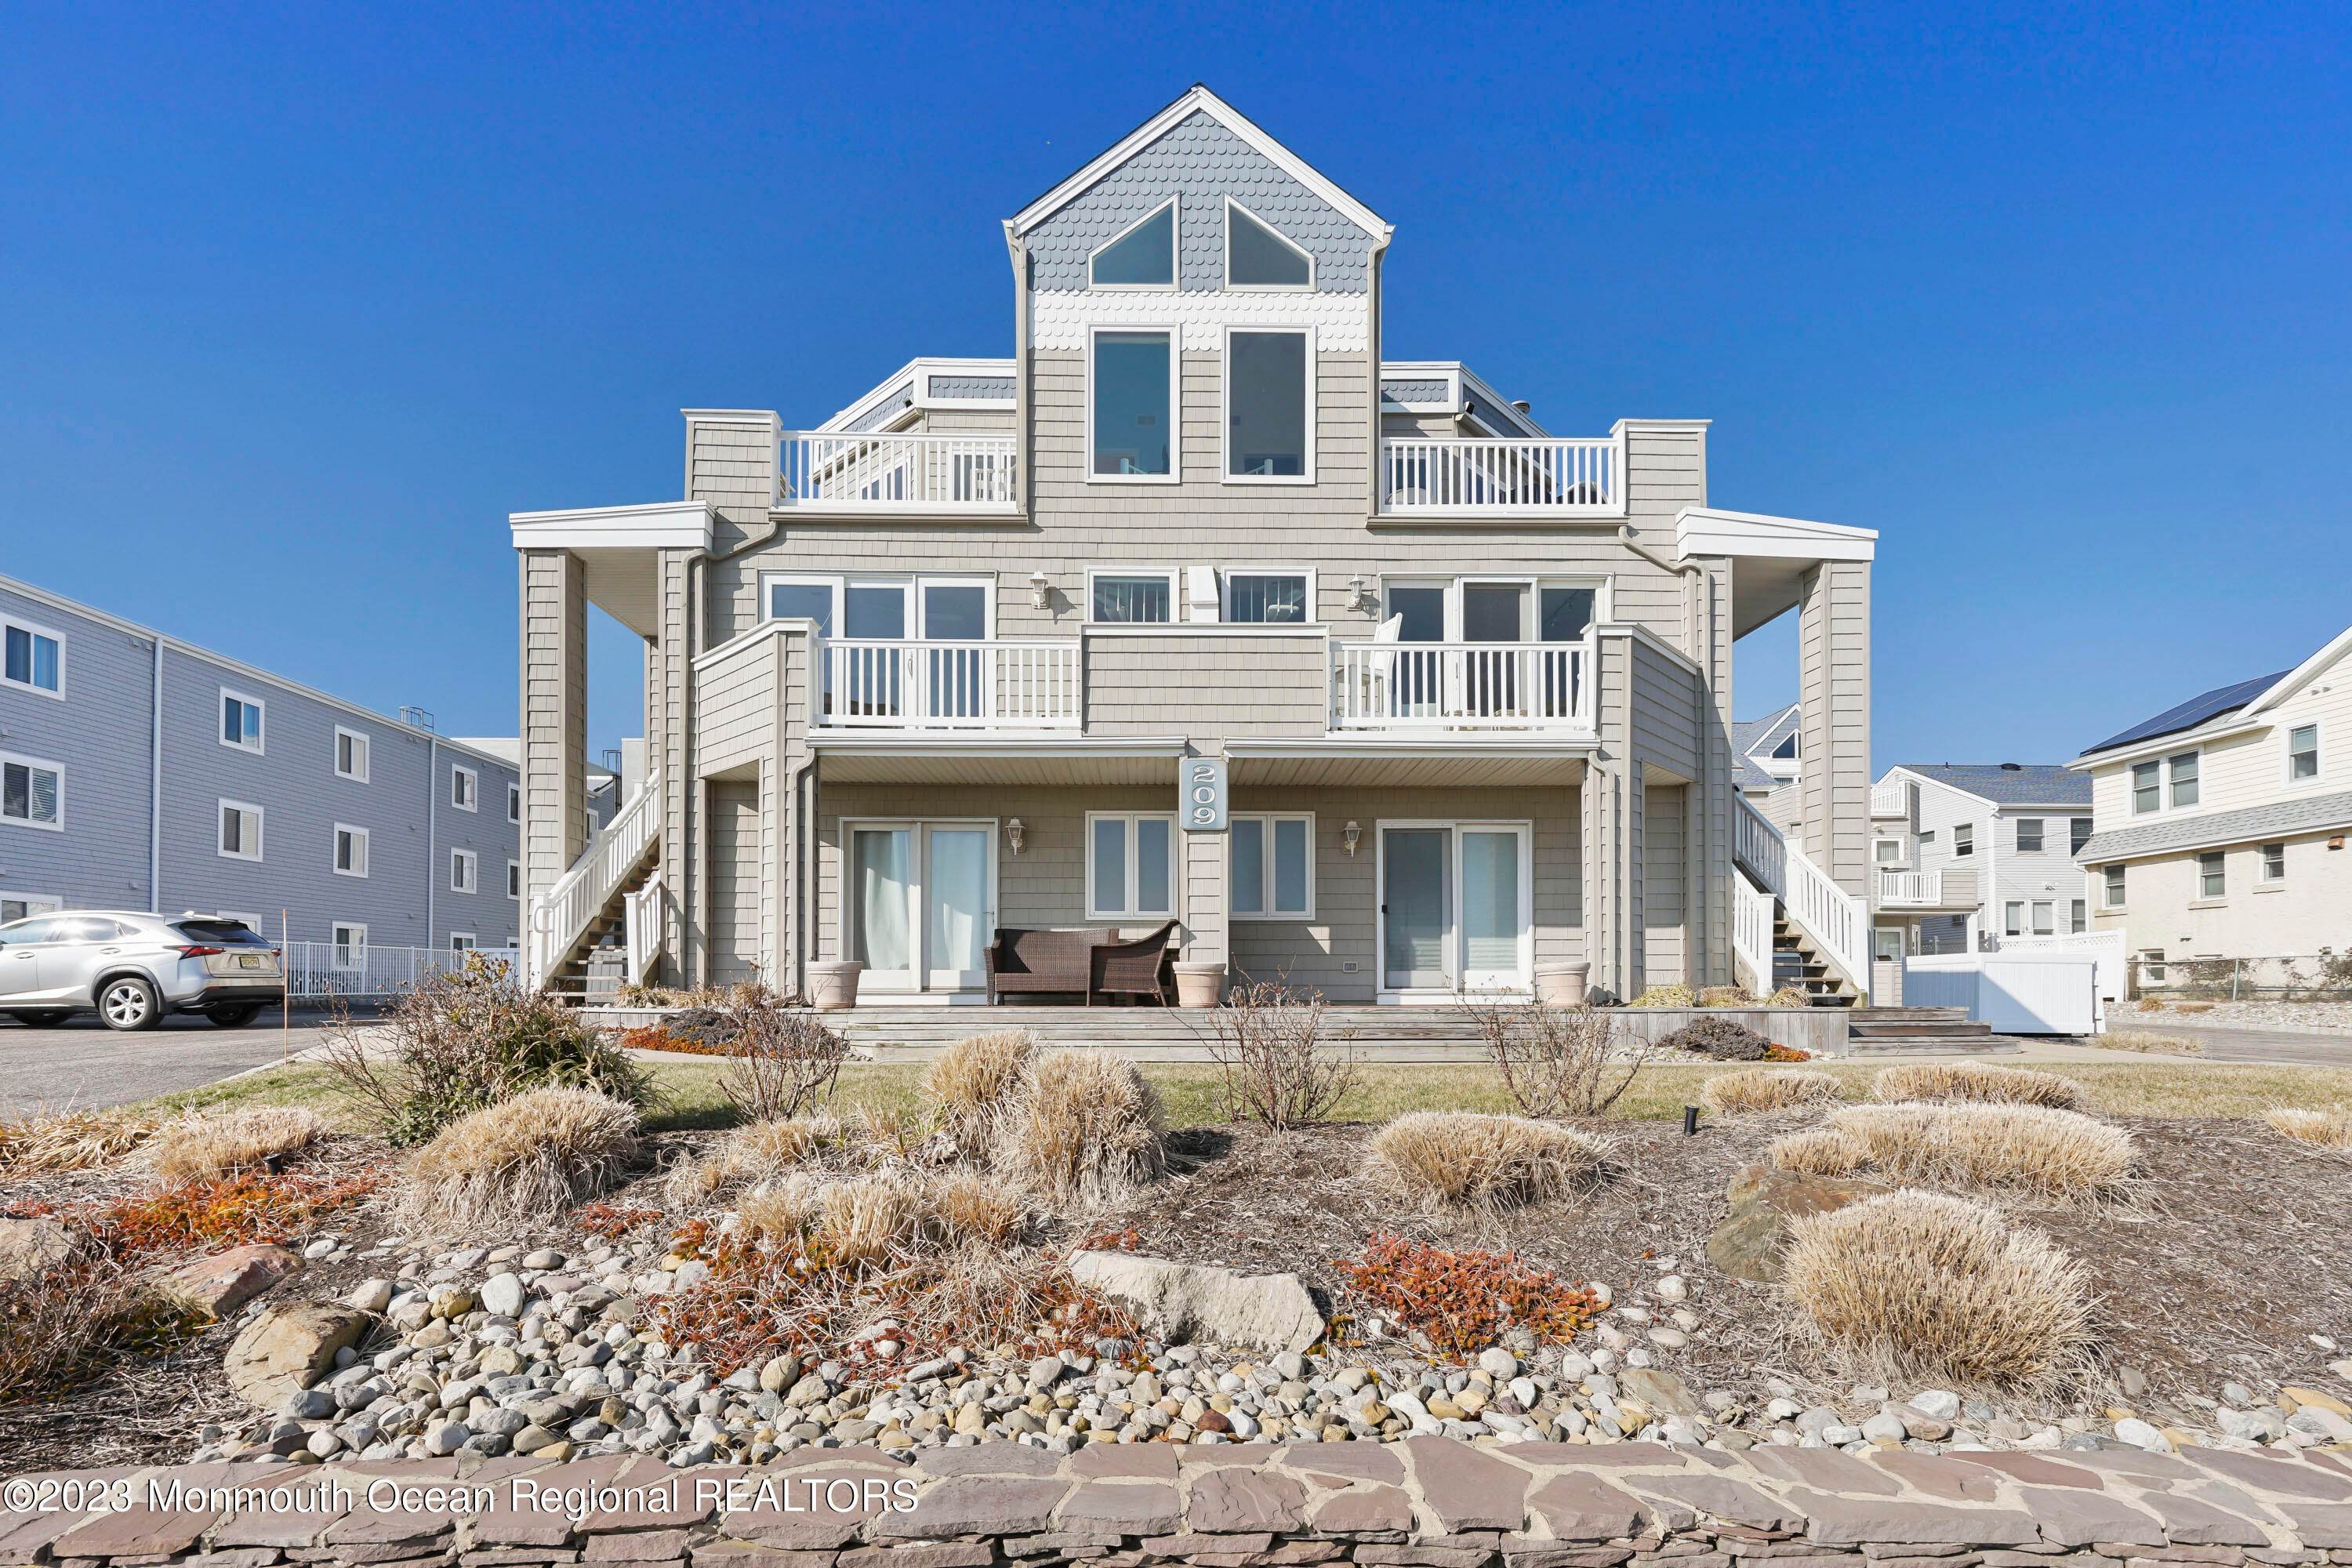 Property for Sale at 209 Ocean Avenue 14 Bradley Beach, New Jersey 07720 United States